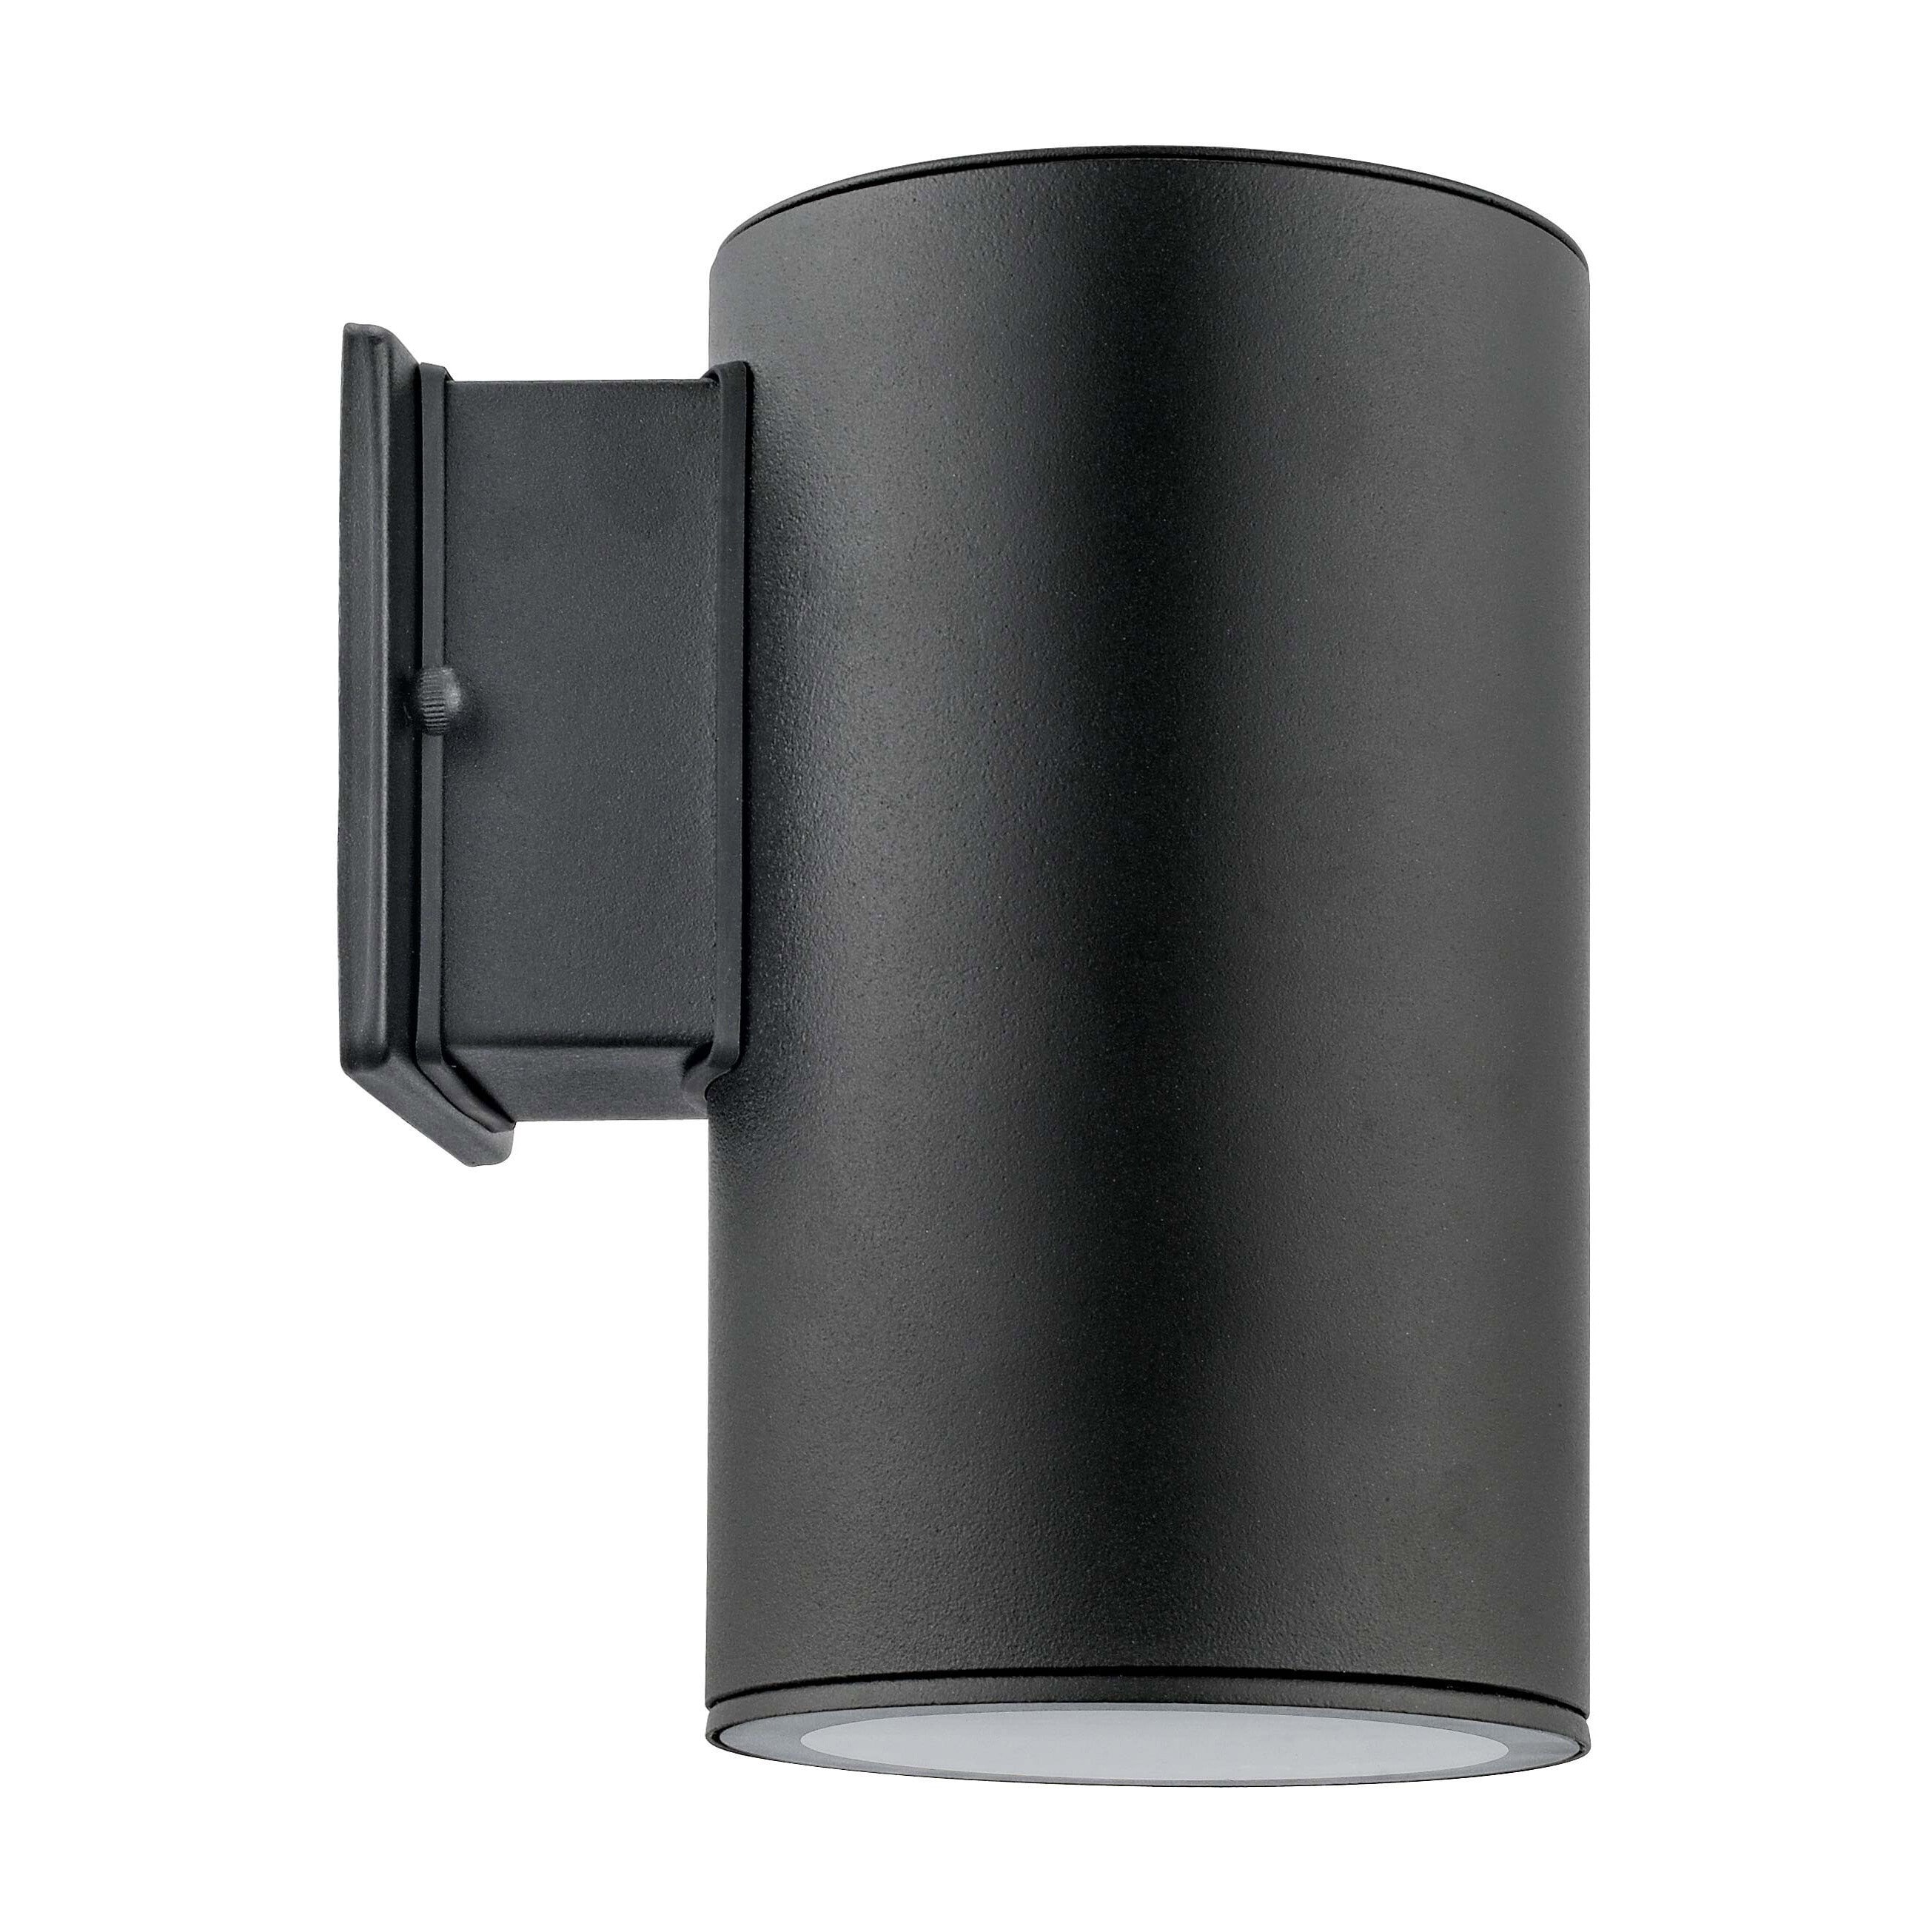 Brand New Eglo "Ascoli" 1-Light Outdoor Light in Stainless Steel Finish 20492A 